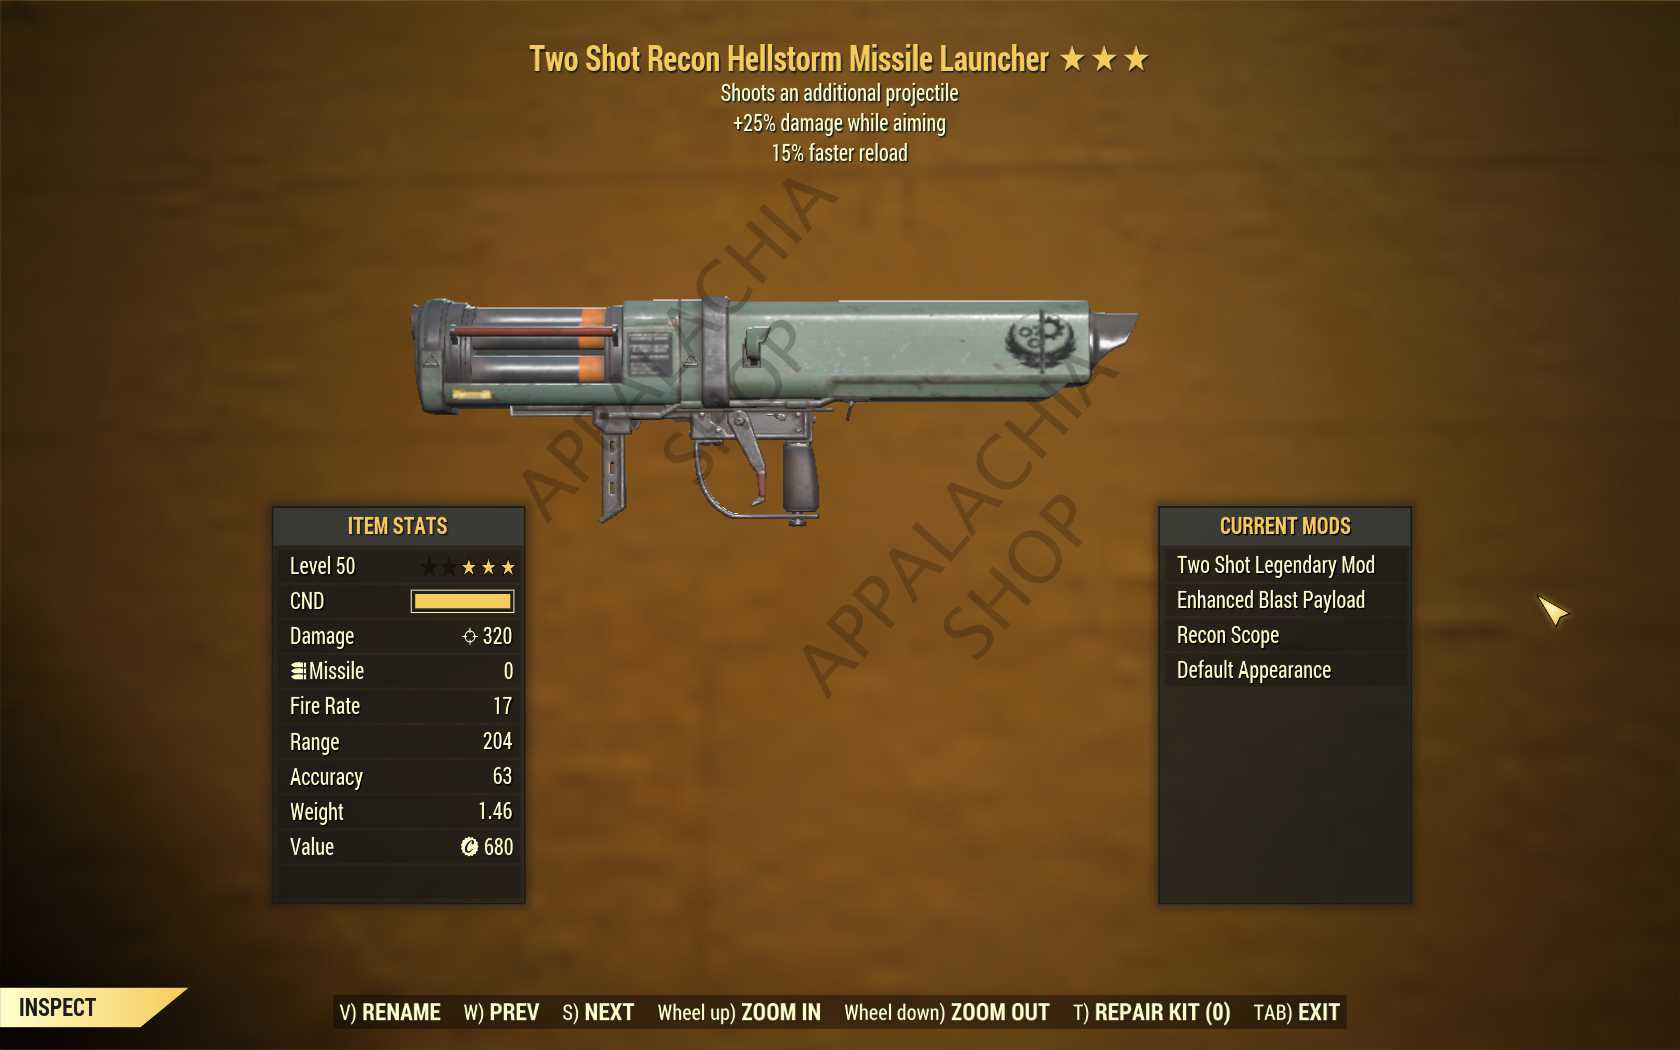 Two Shot Hellstorm Missile Launcher (+25% damage WA, 15% faster reload)[FULL MODS]